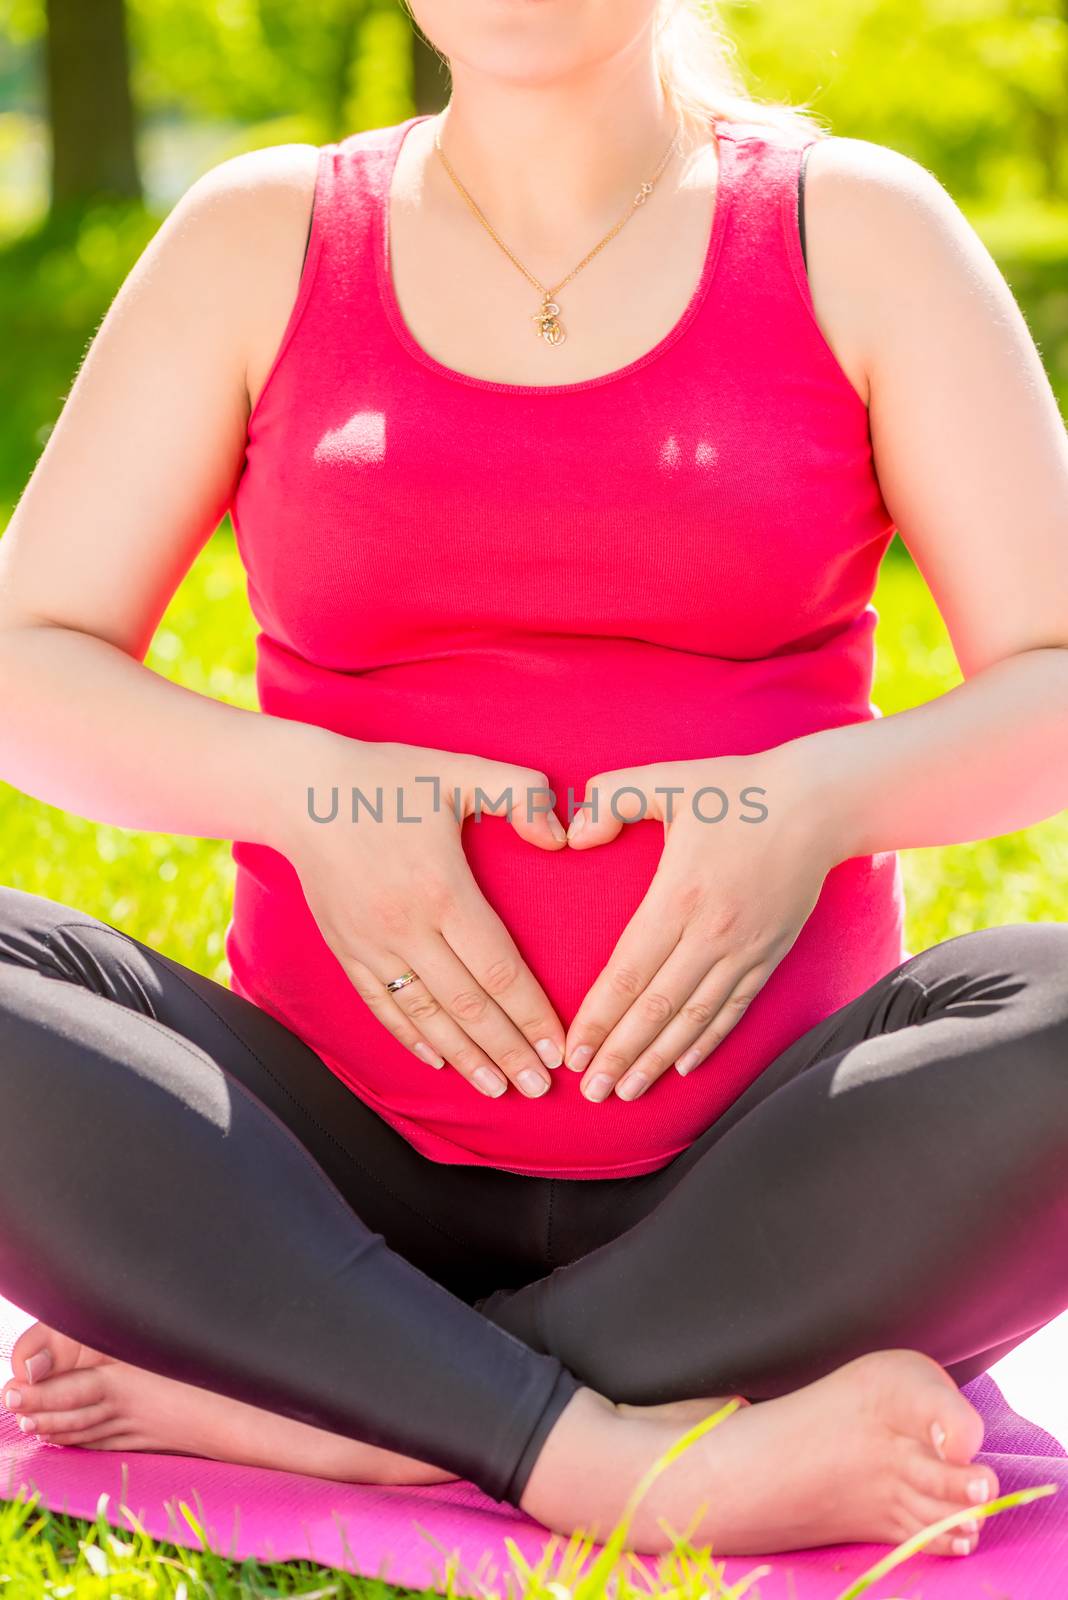 the symbolic heart symbol expectant mother, pointing to his stomach